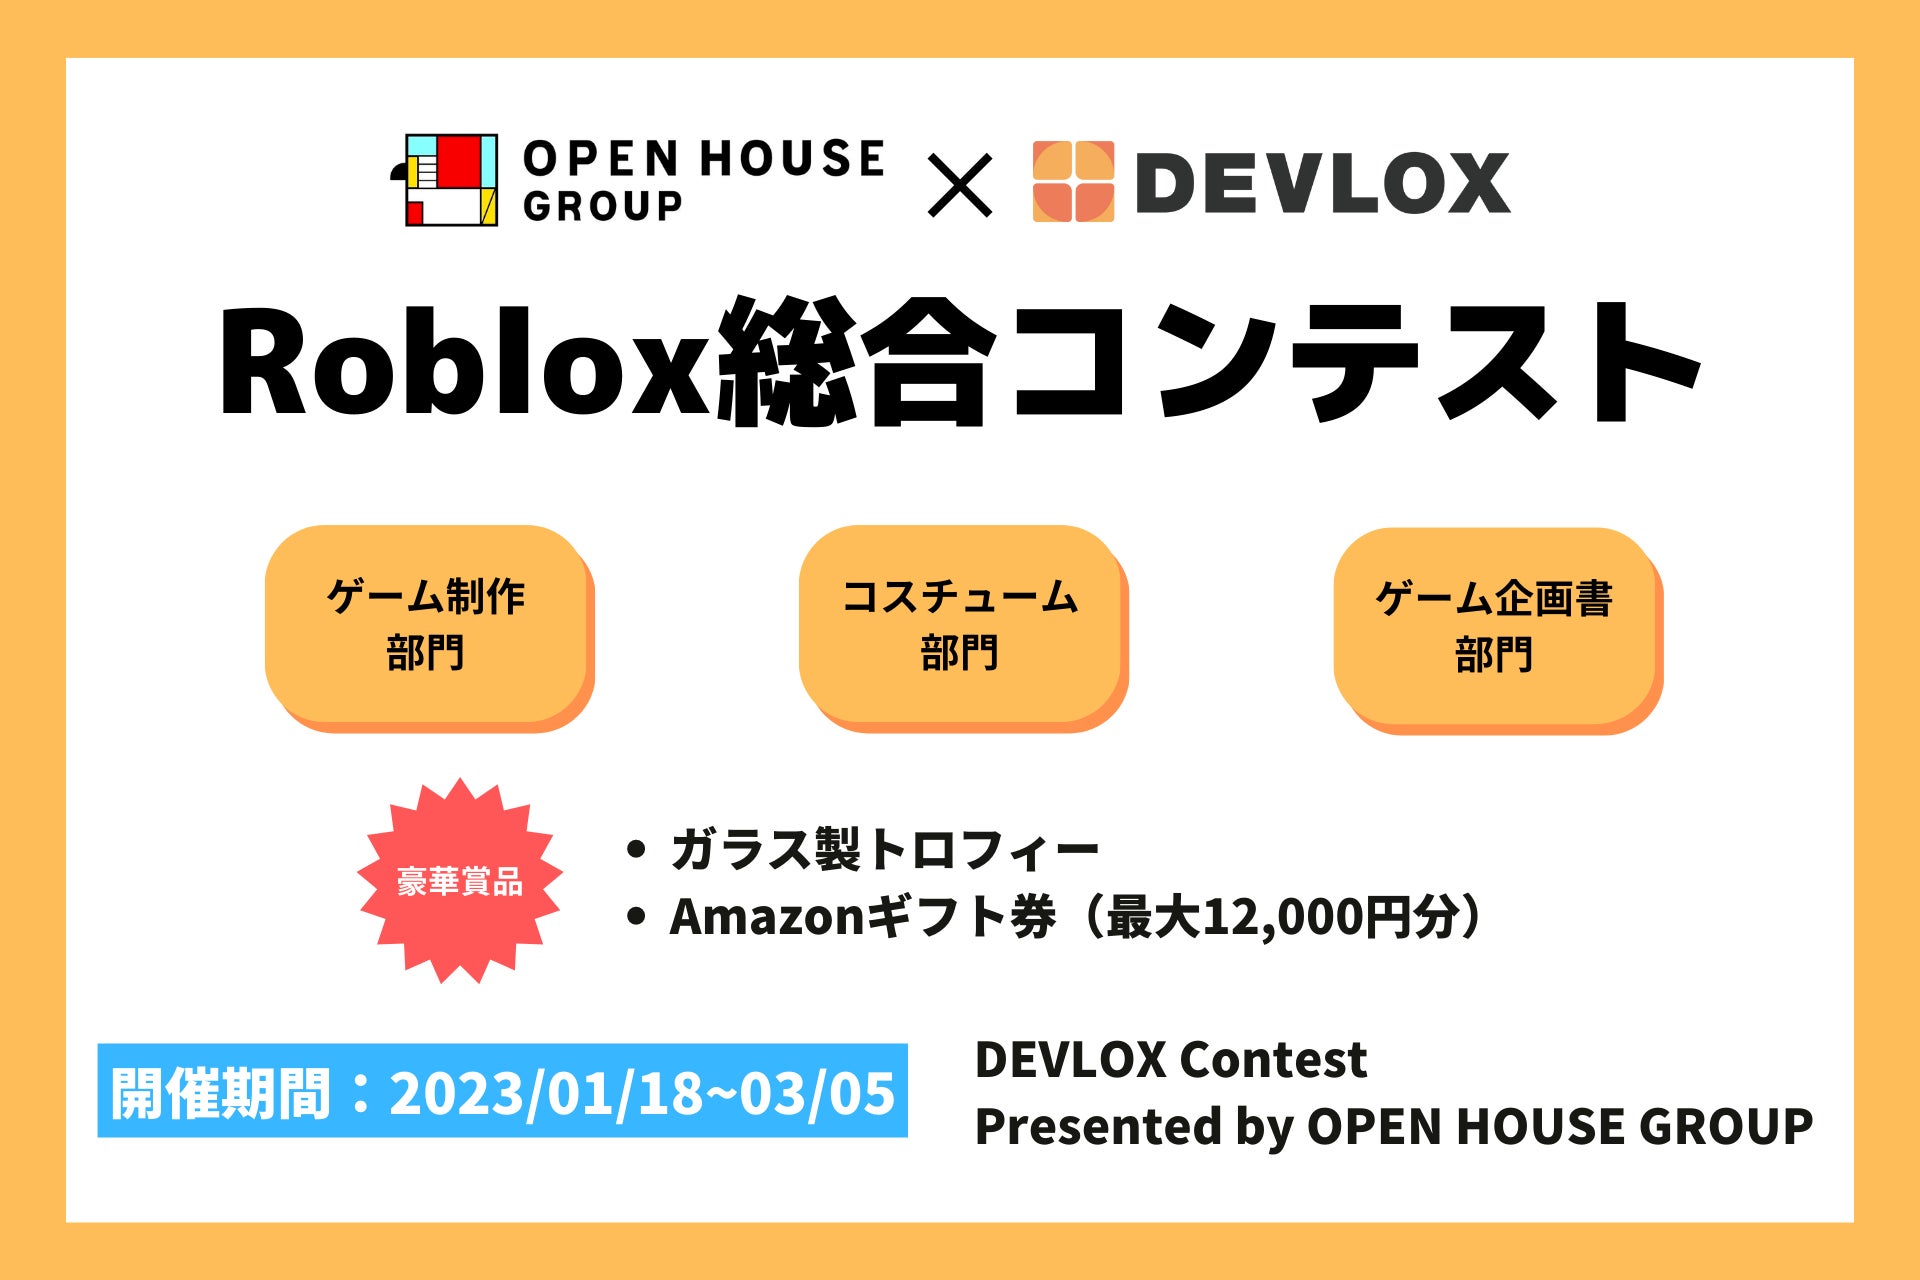 Roblox総合コンテスト『DEVLOX Contest Presented by OPEN HOUSE GROUP』開催！のサブ画像1